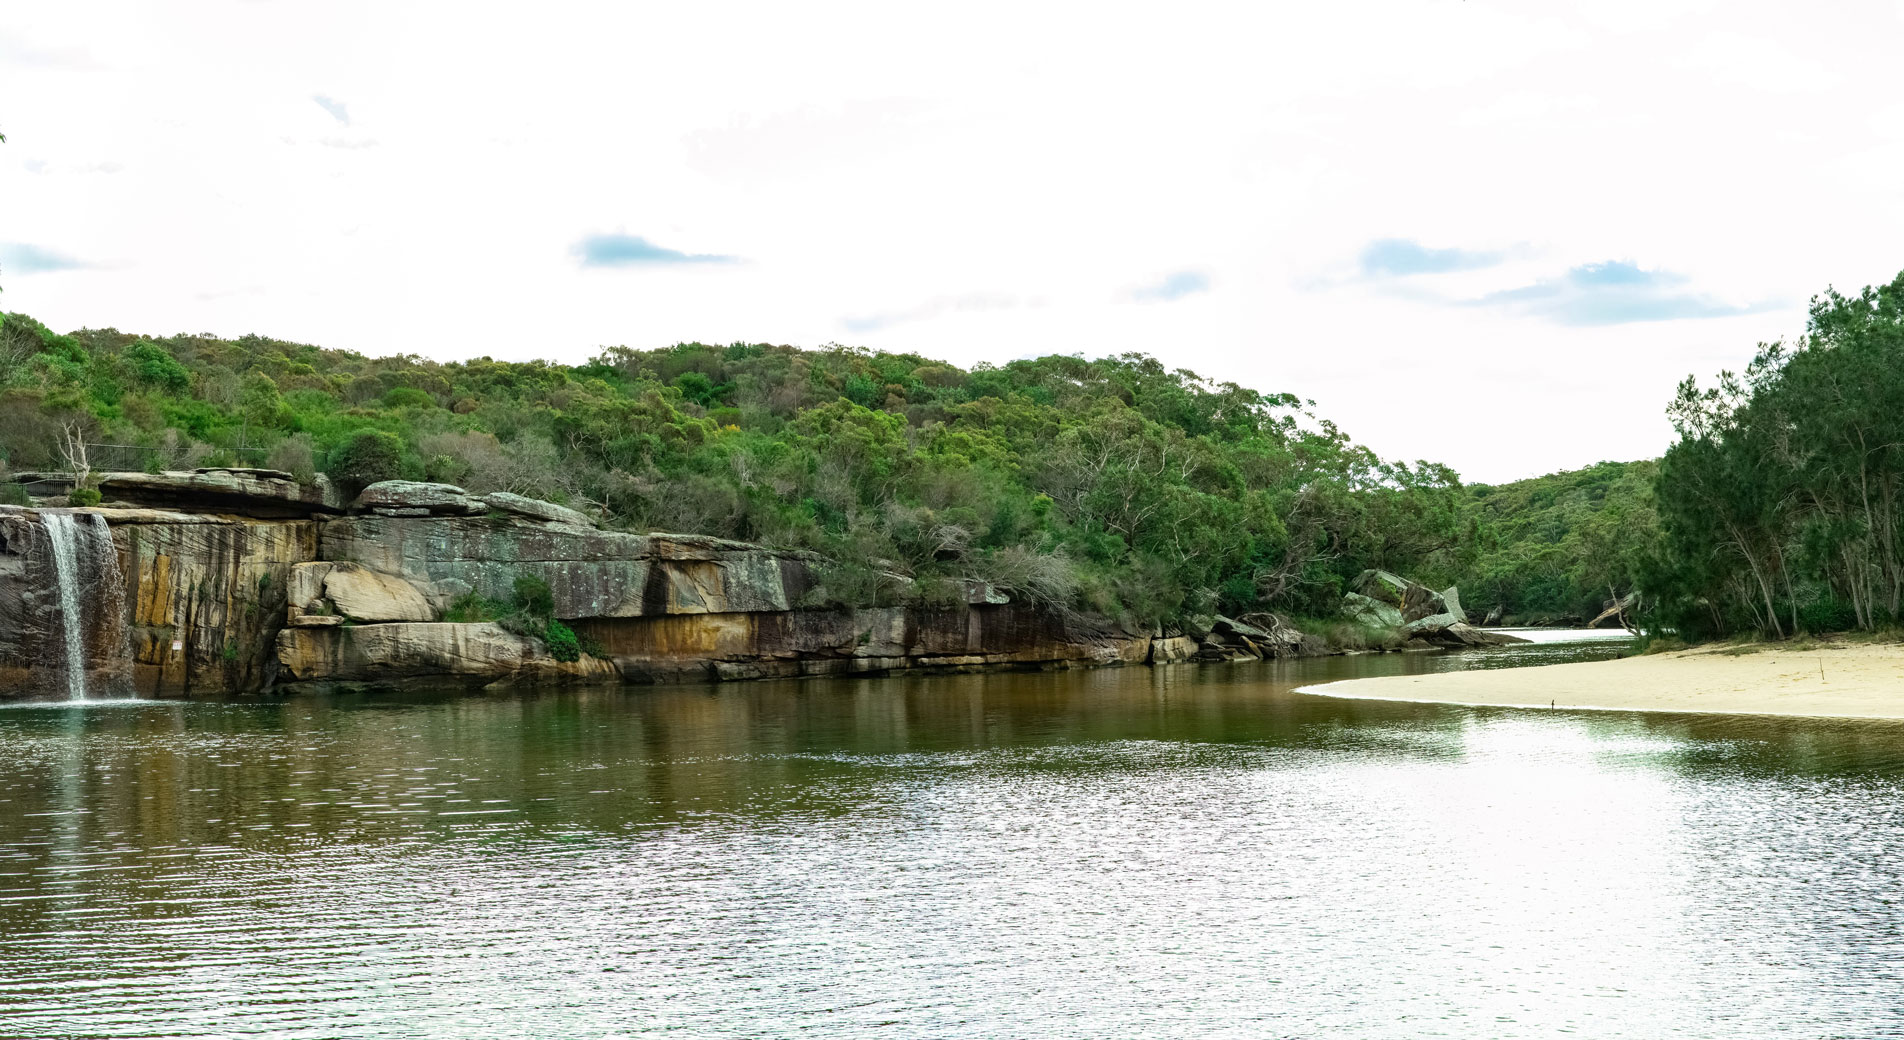 wattamolla lagoon. foreground is light reflected of water, with small waterfall to left side image over rocks. midground has green bushland, background is bright white sky. to the right is a small crop of sand jutting out from bush.